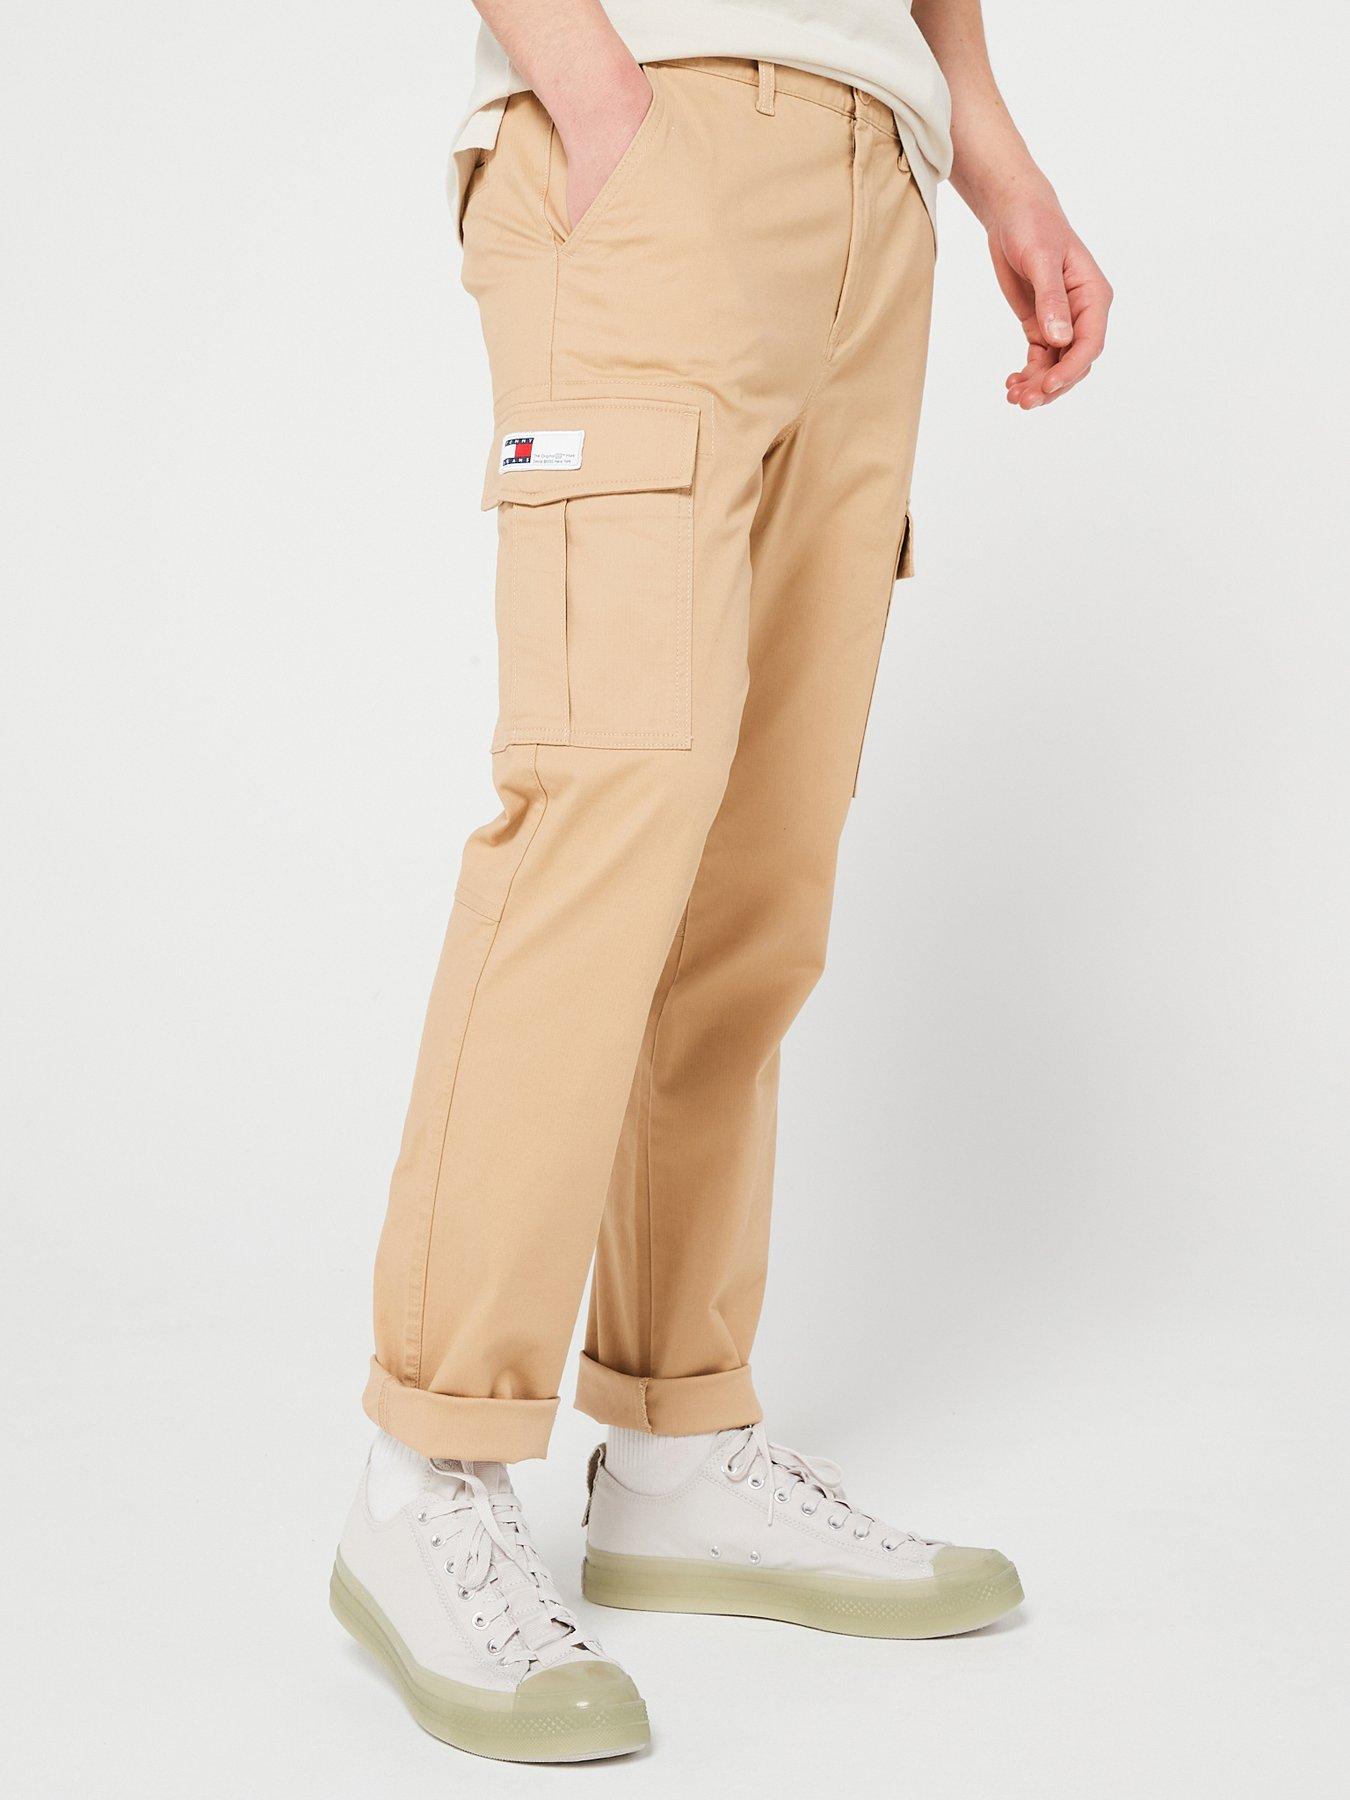 72 Most Saved Brown Cargo Pants Outfit Guides You Need To See This Spring |  Cargo pants outfit men, Mens streetwear, Streetwear men outfits